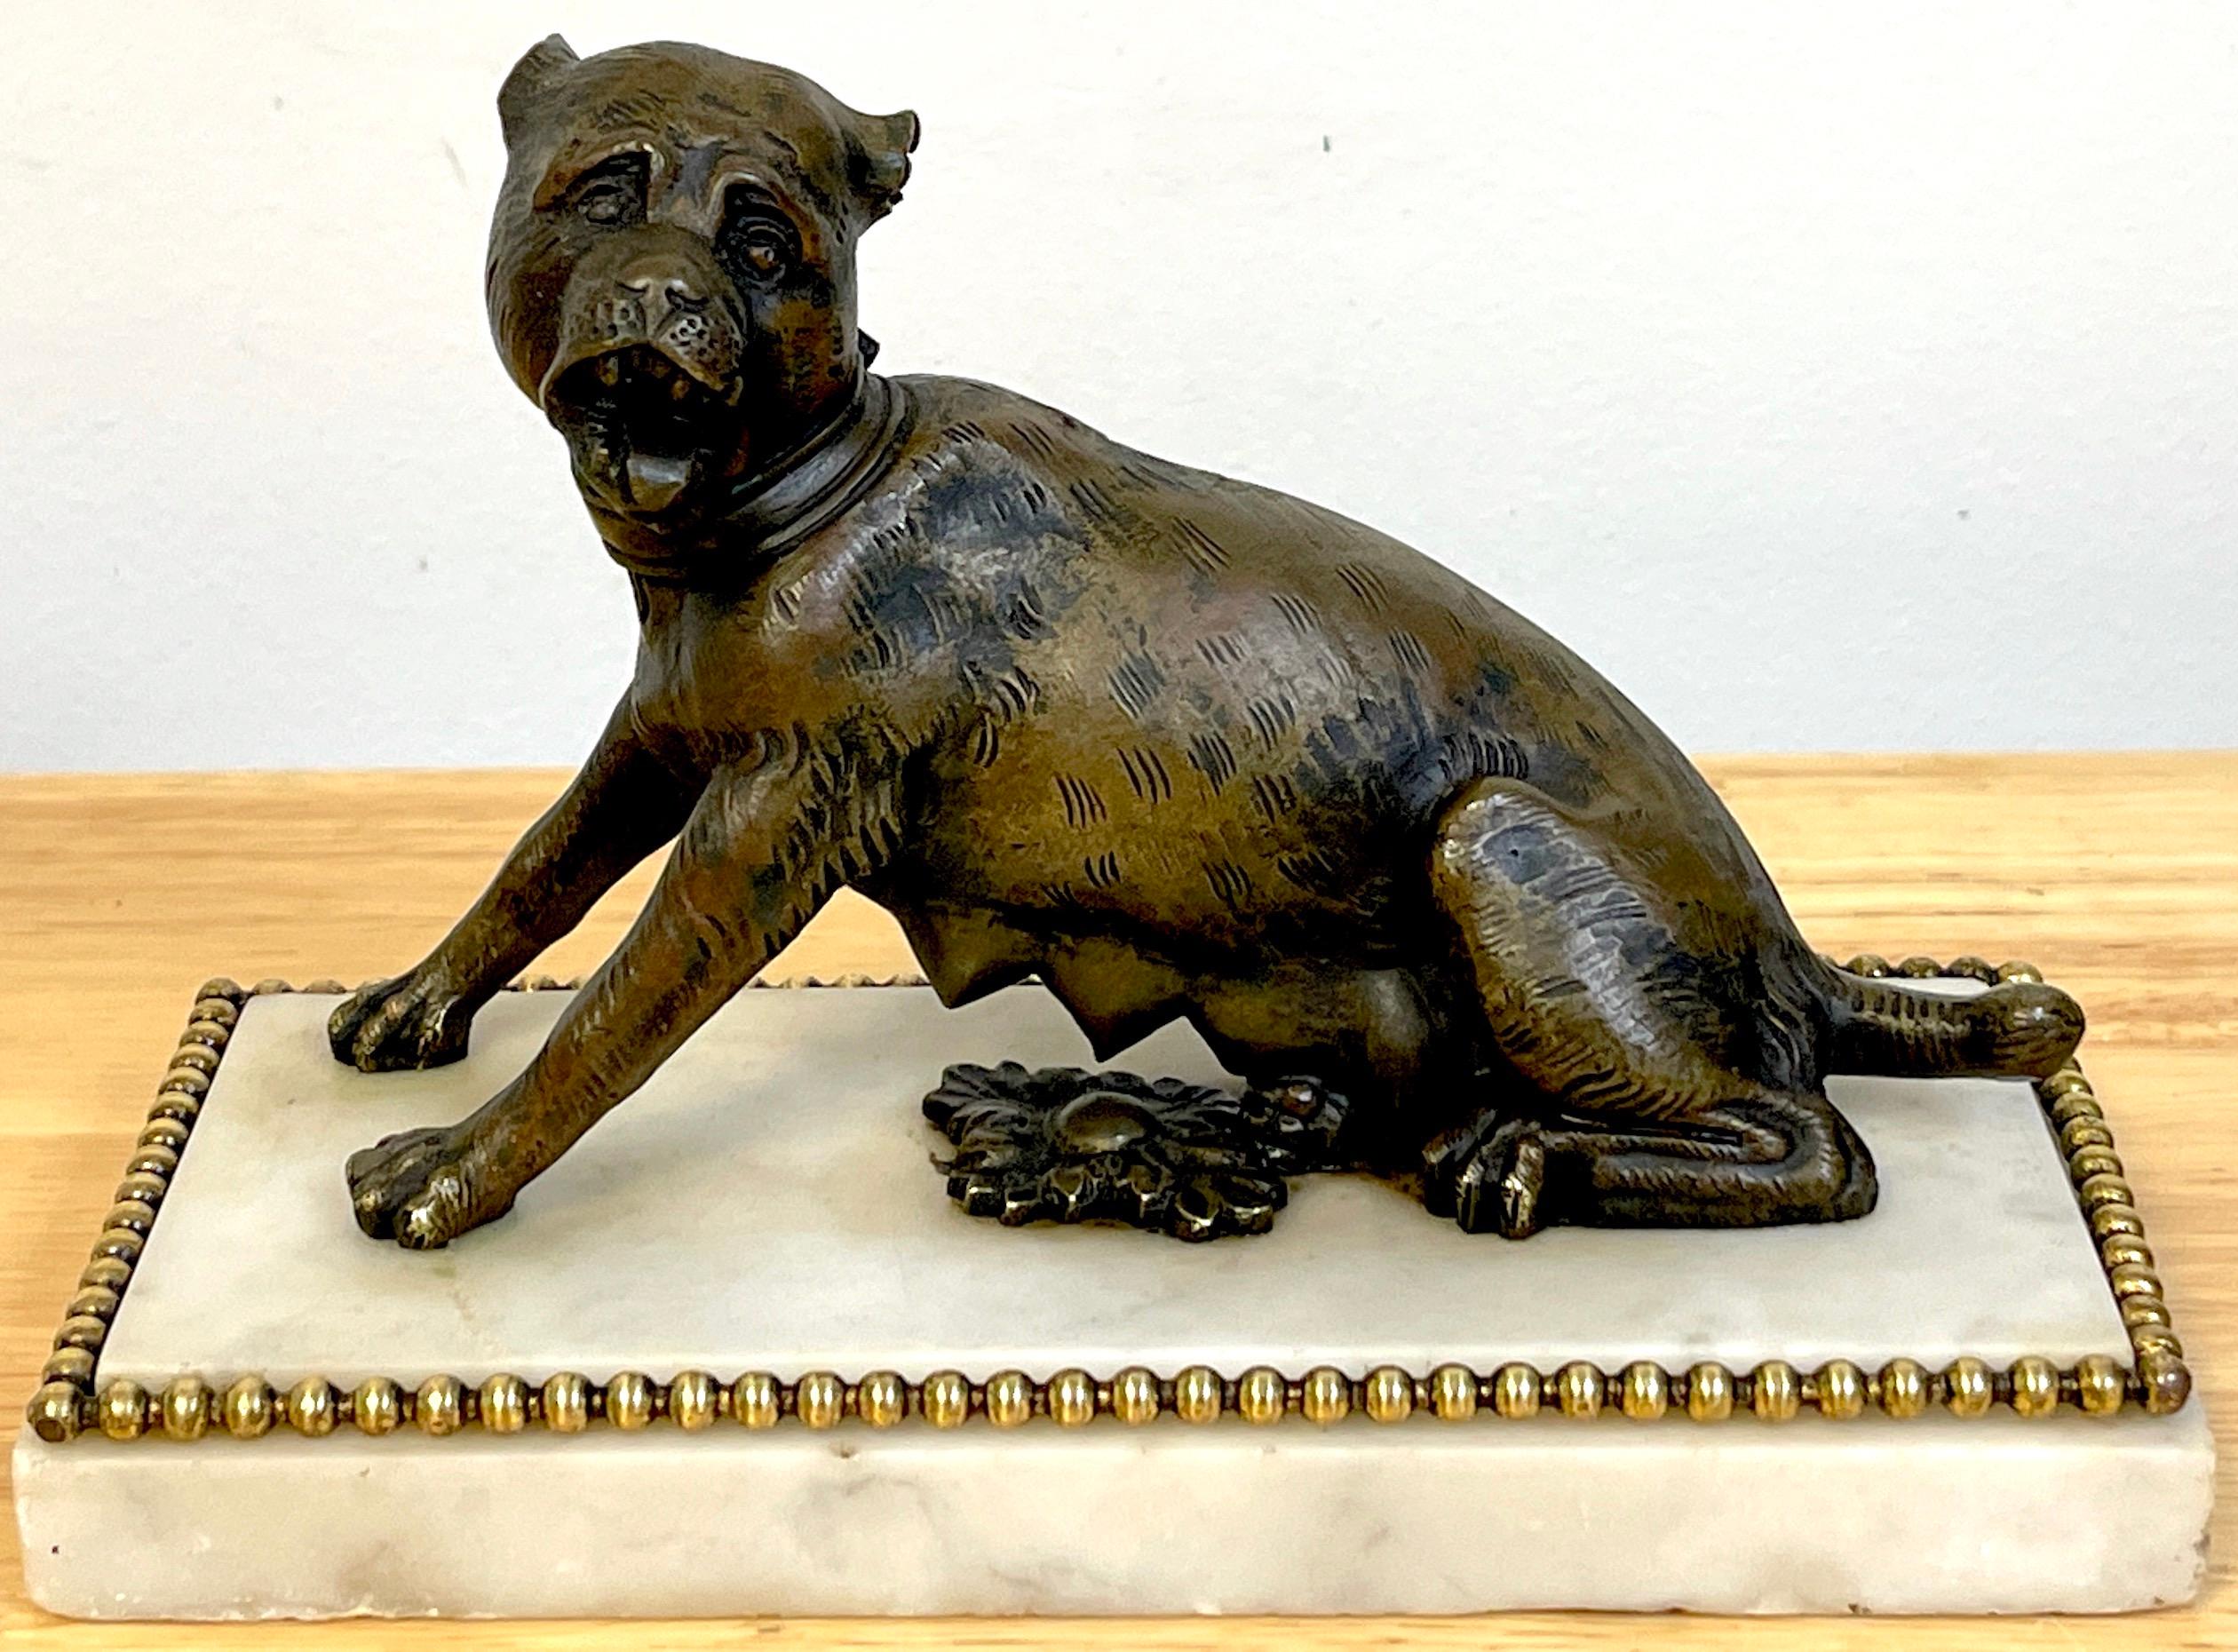 18th-19th ( or older) century Italian bronze sculpture of a seated she-wolf.
Similar to the Capitoline Wolf /Lupa Capitolina without, Romulus and Remus, with two front paws raised, mounted on a rectangular ormolu mounted Carrara marble base. An